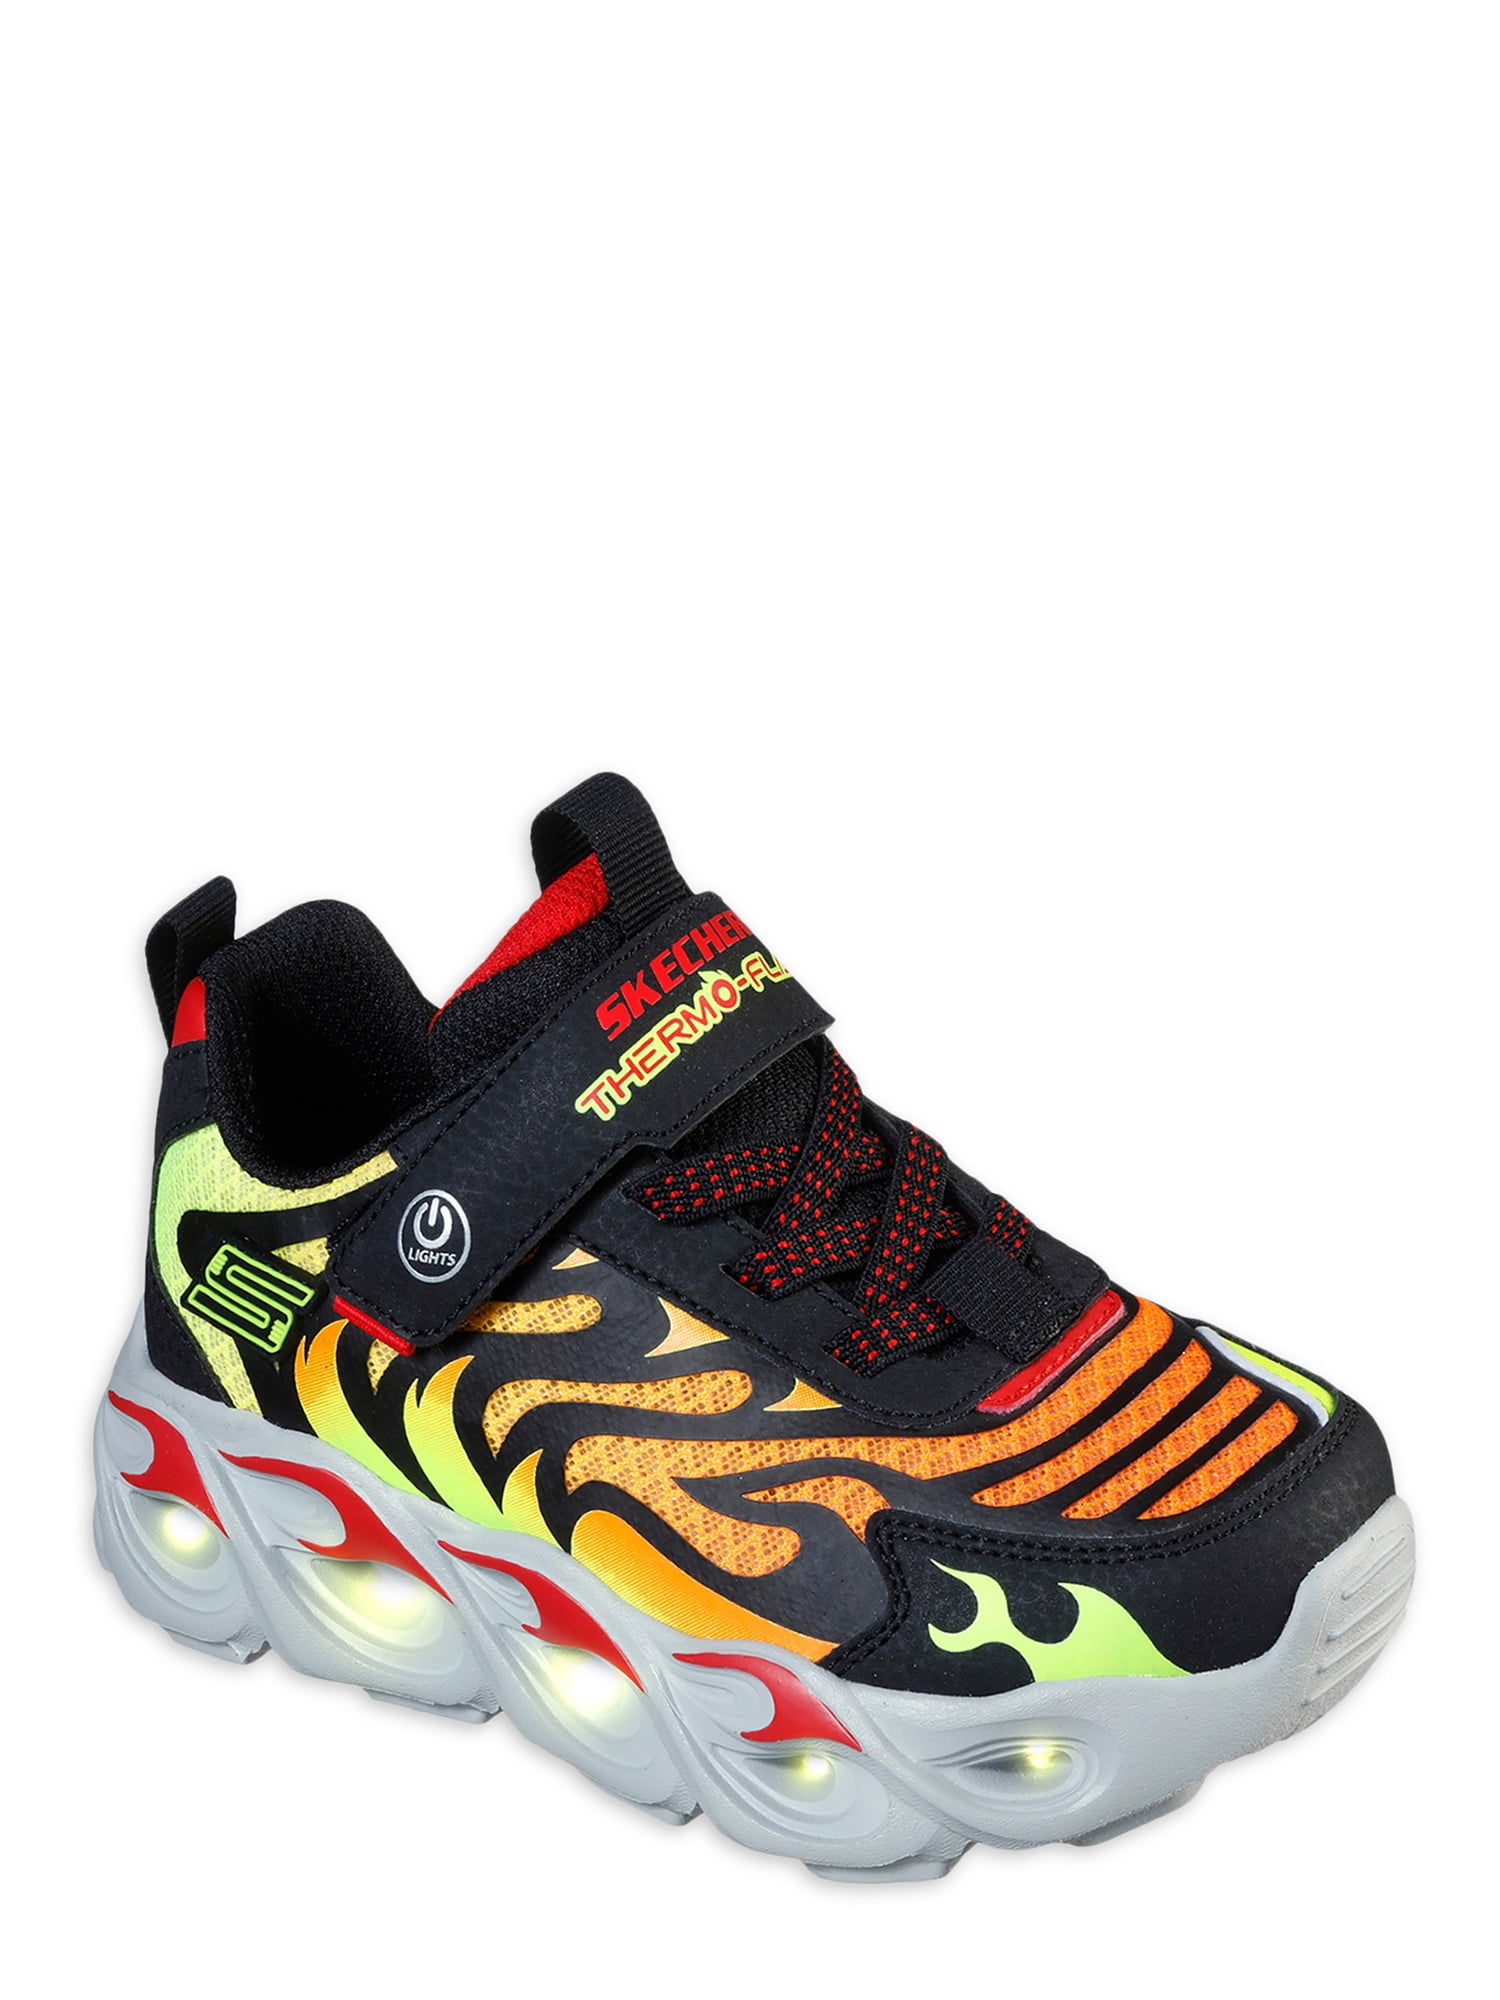 Skechers Thermoflash Athletic Sneakers (Little Boy and Big Boy) Walmart.com